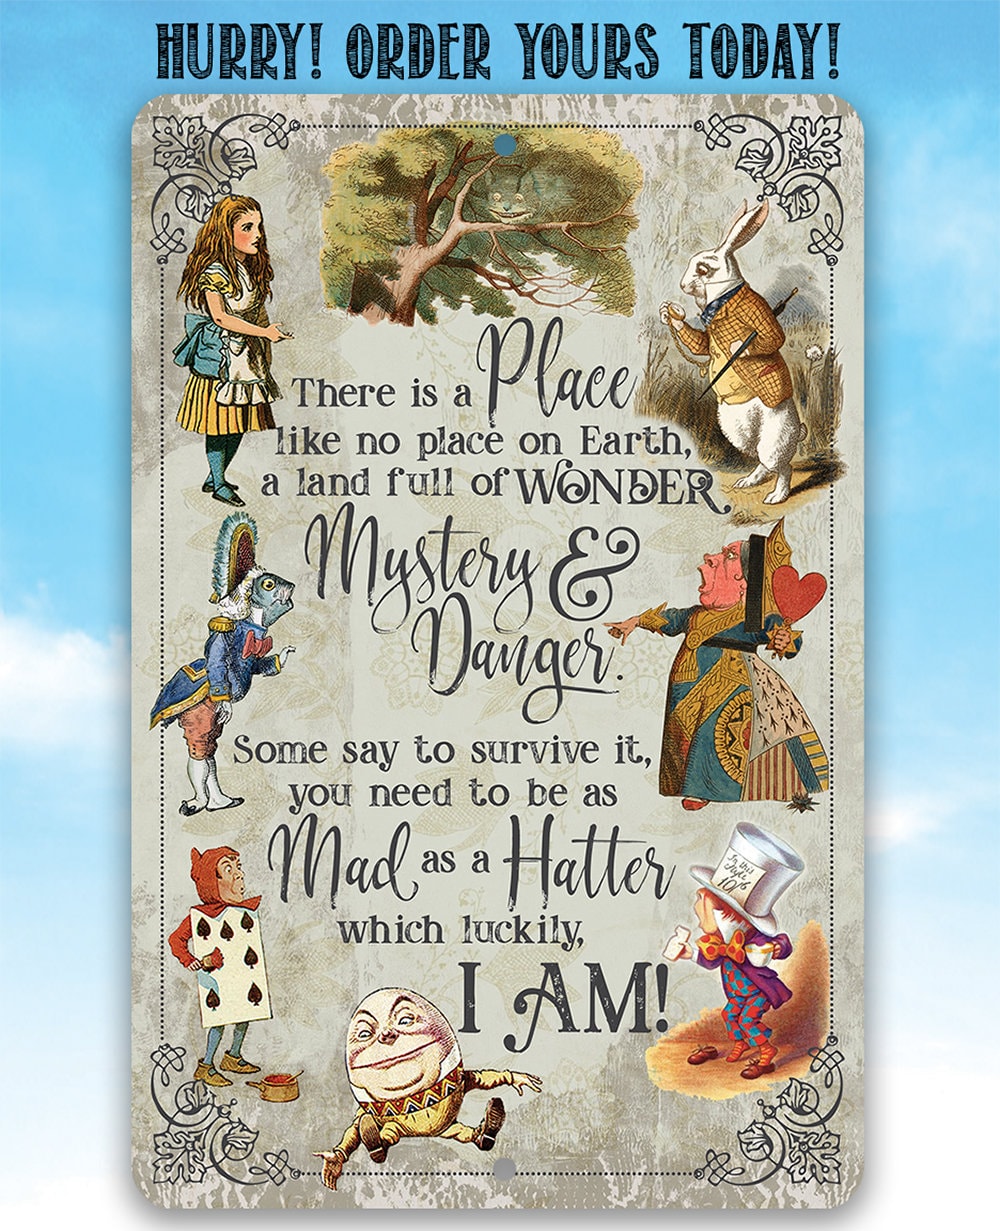 There Is A Place Like No Place On Earth - 8" x 12" or 12" x 18" Aluminum Tin Awesome Metal Poster Lone Star Art 